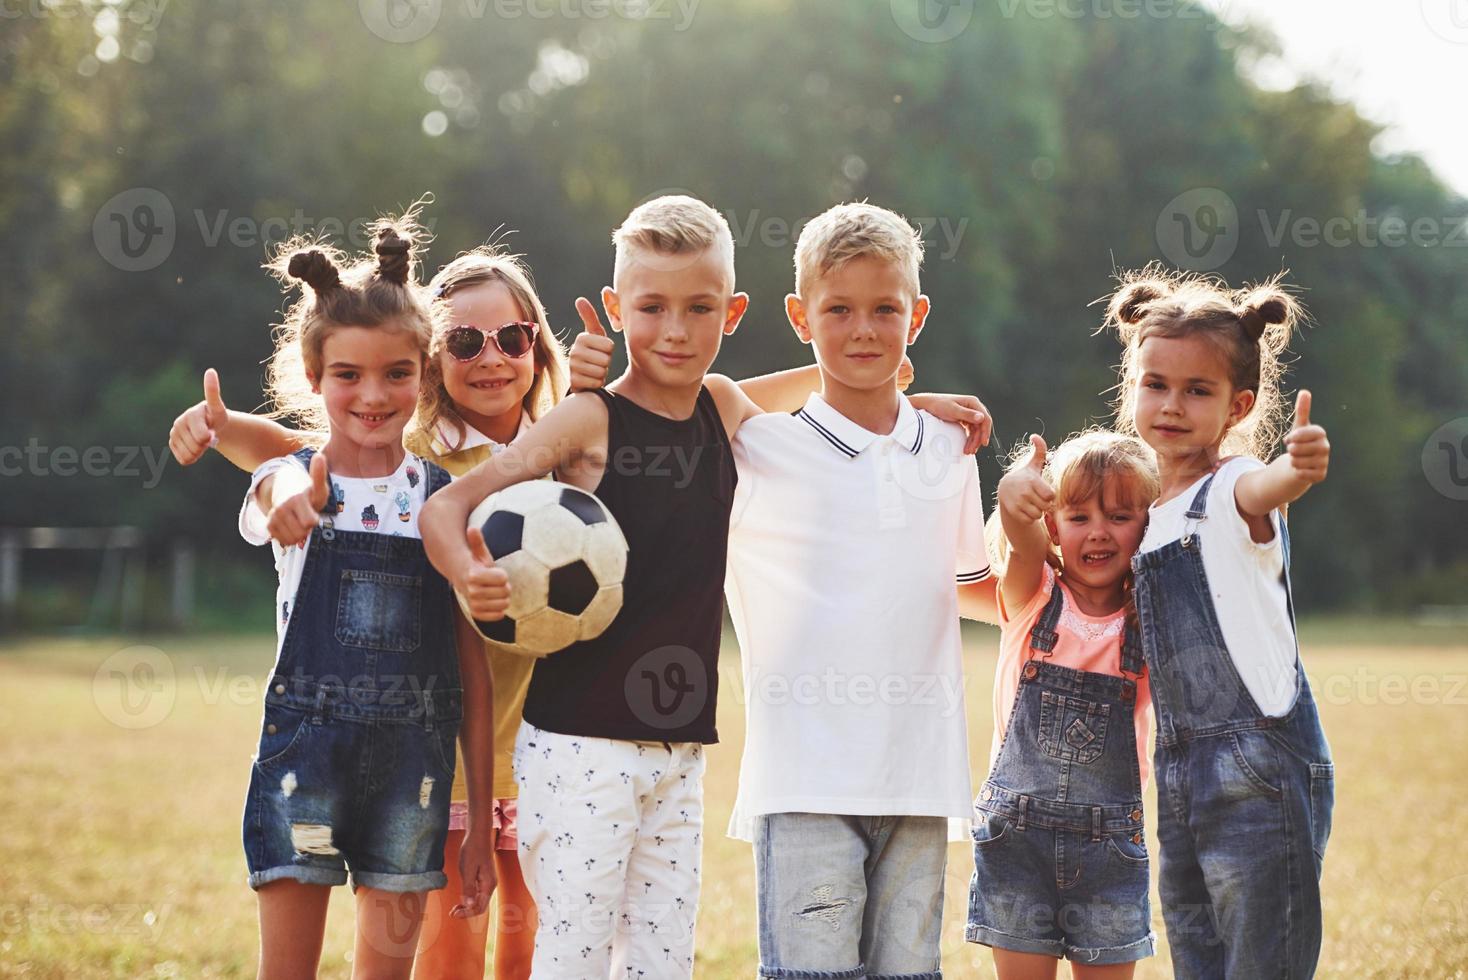 Young sportive kids with soccer ball stands together in the field at sunny day photo